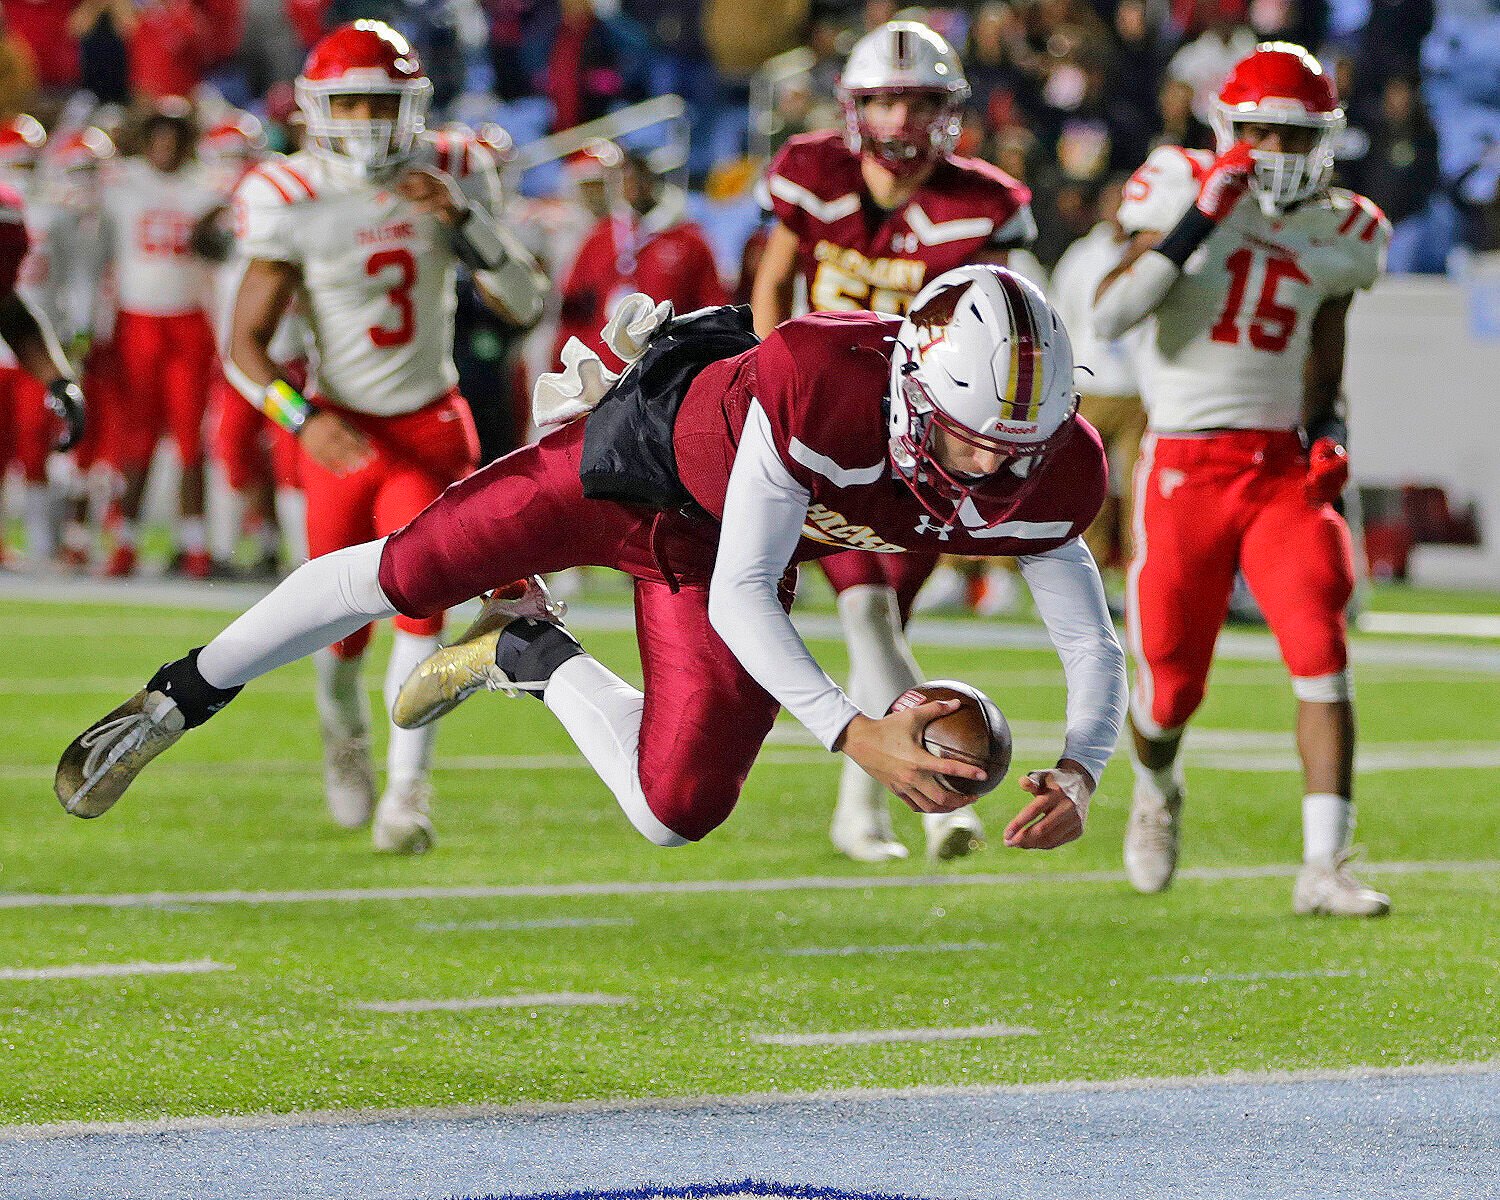 Hickory Red Tornadoes Win First Football State Championship in 27 Years